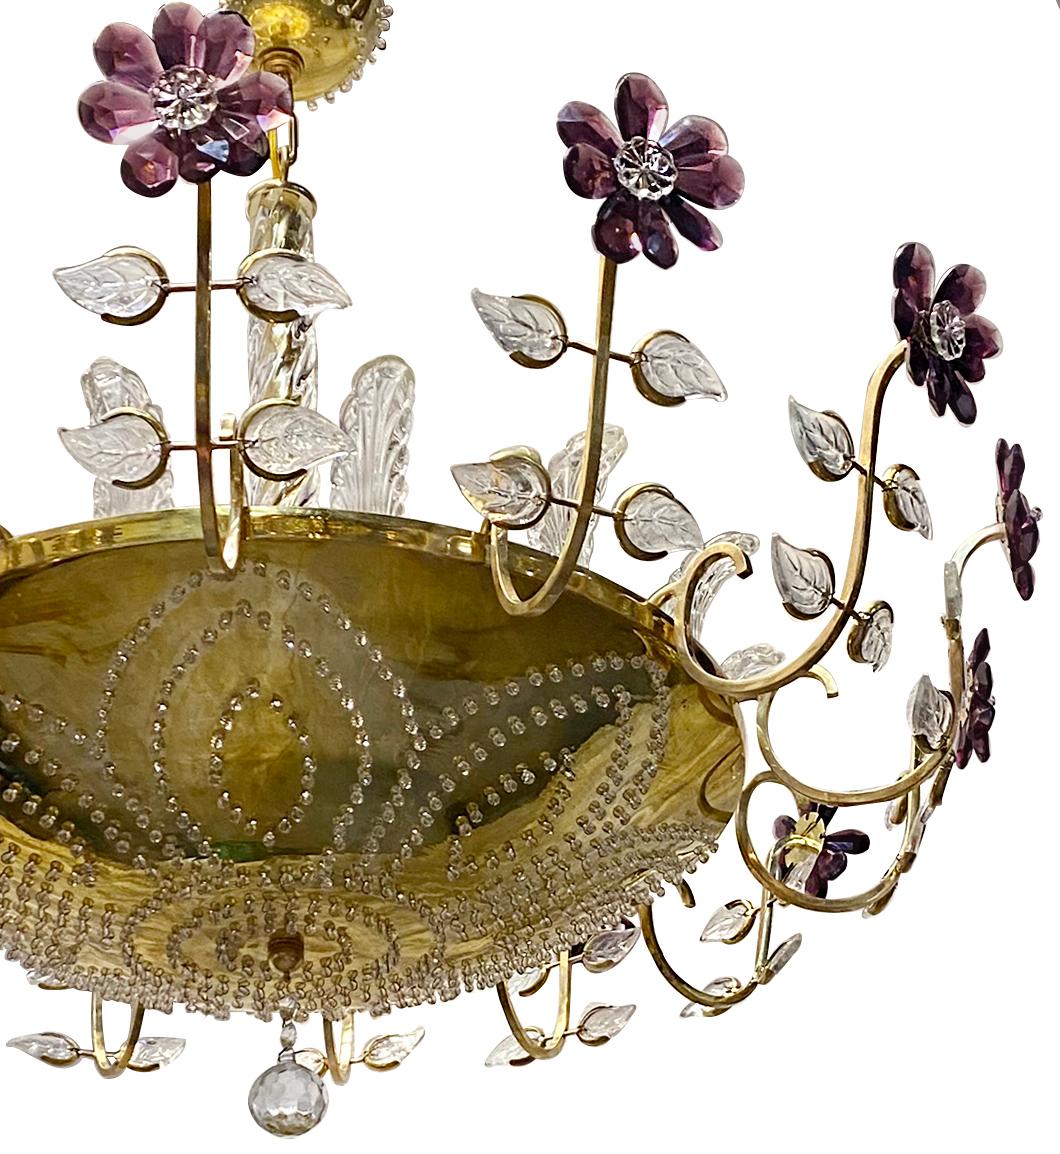 A circa 1950's French gilt light fixture with crystal insets in body and amethyst crystal flowers, molded glass leaves and six interior lights.

Measurements:
Current drop: 26